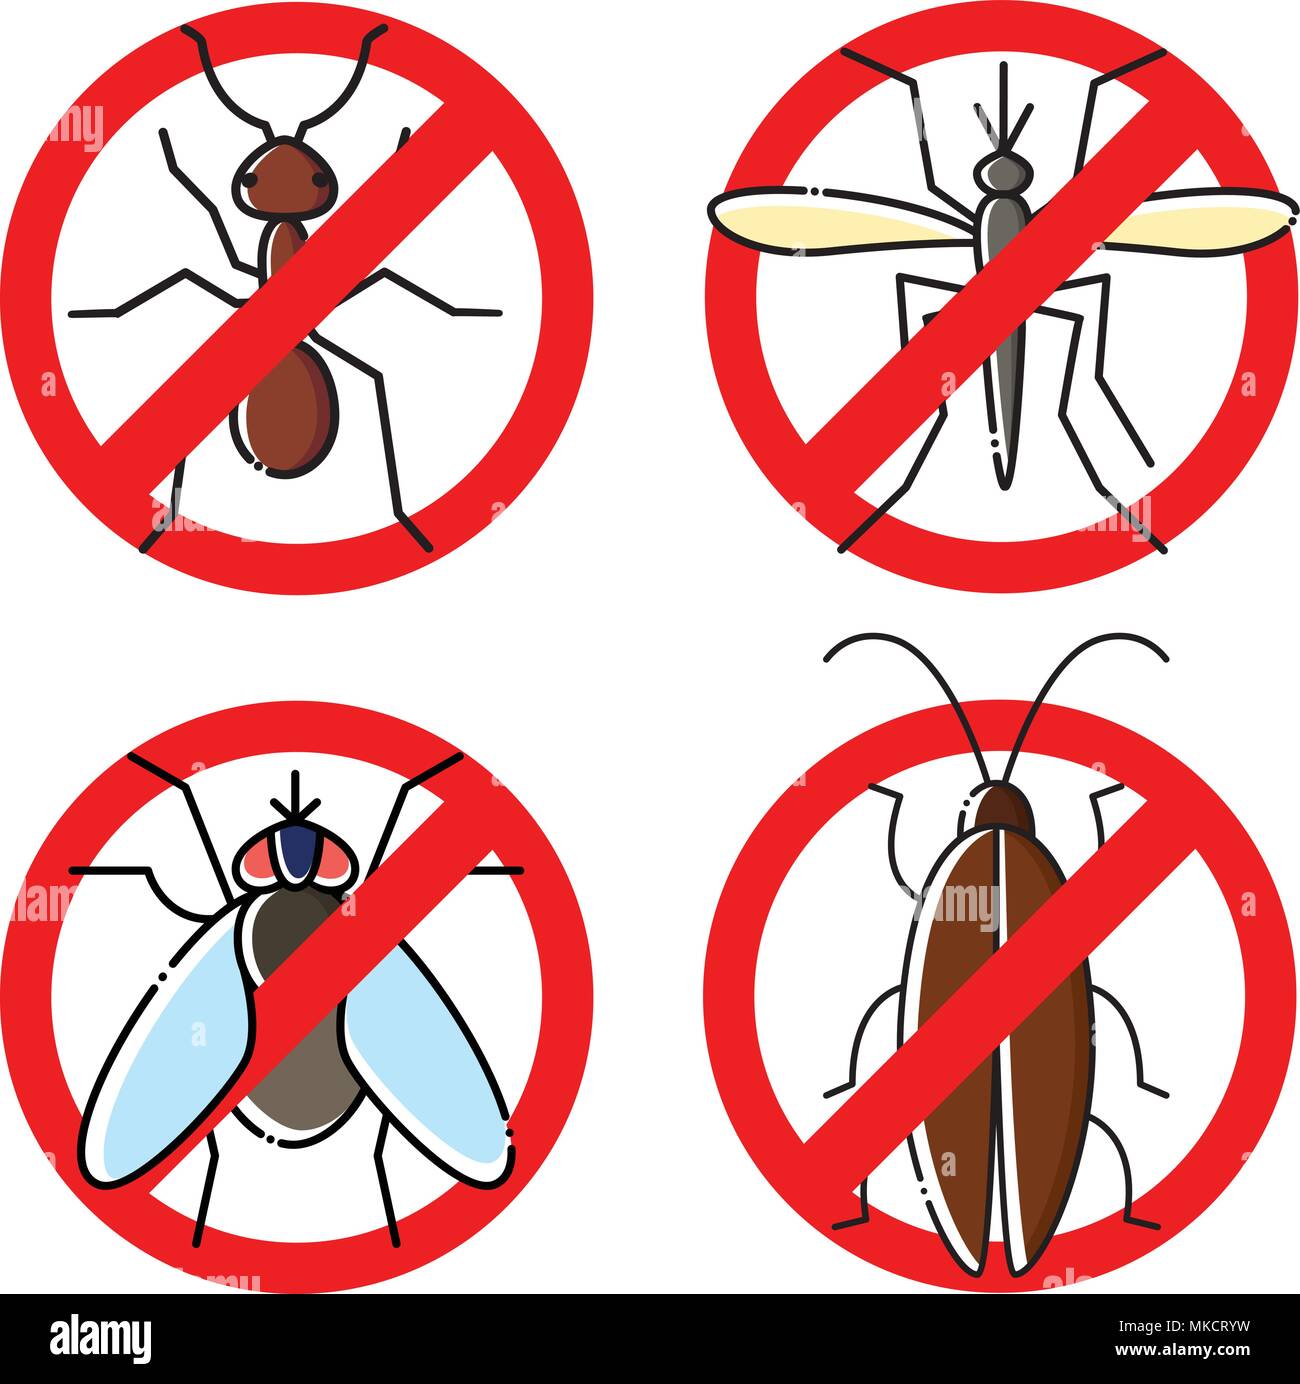 No insects flat icons set. Insecticide symbols. Stock Vector